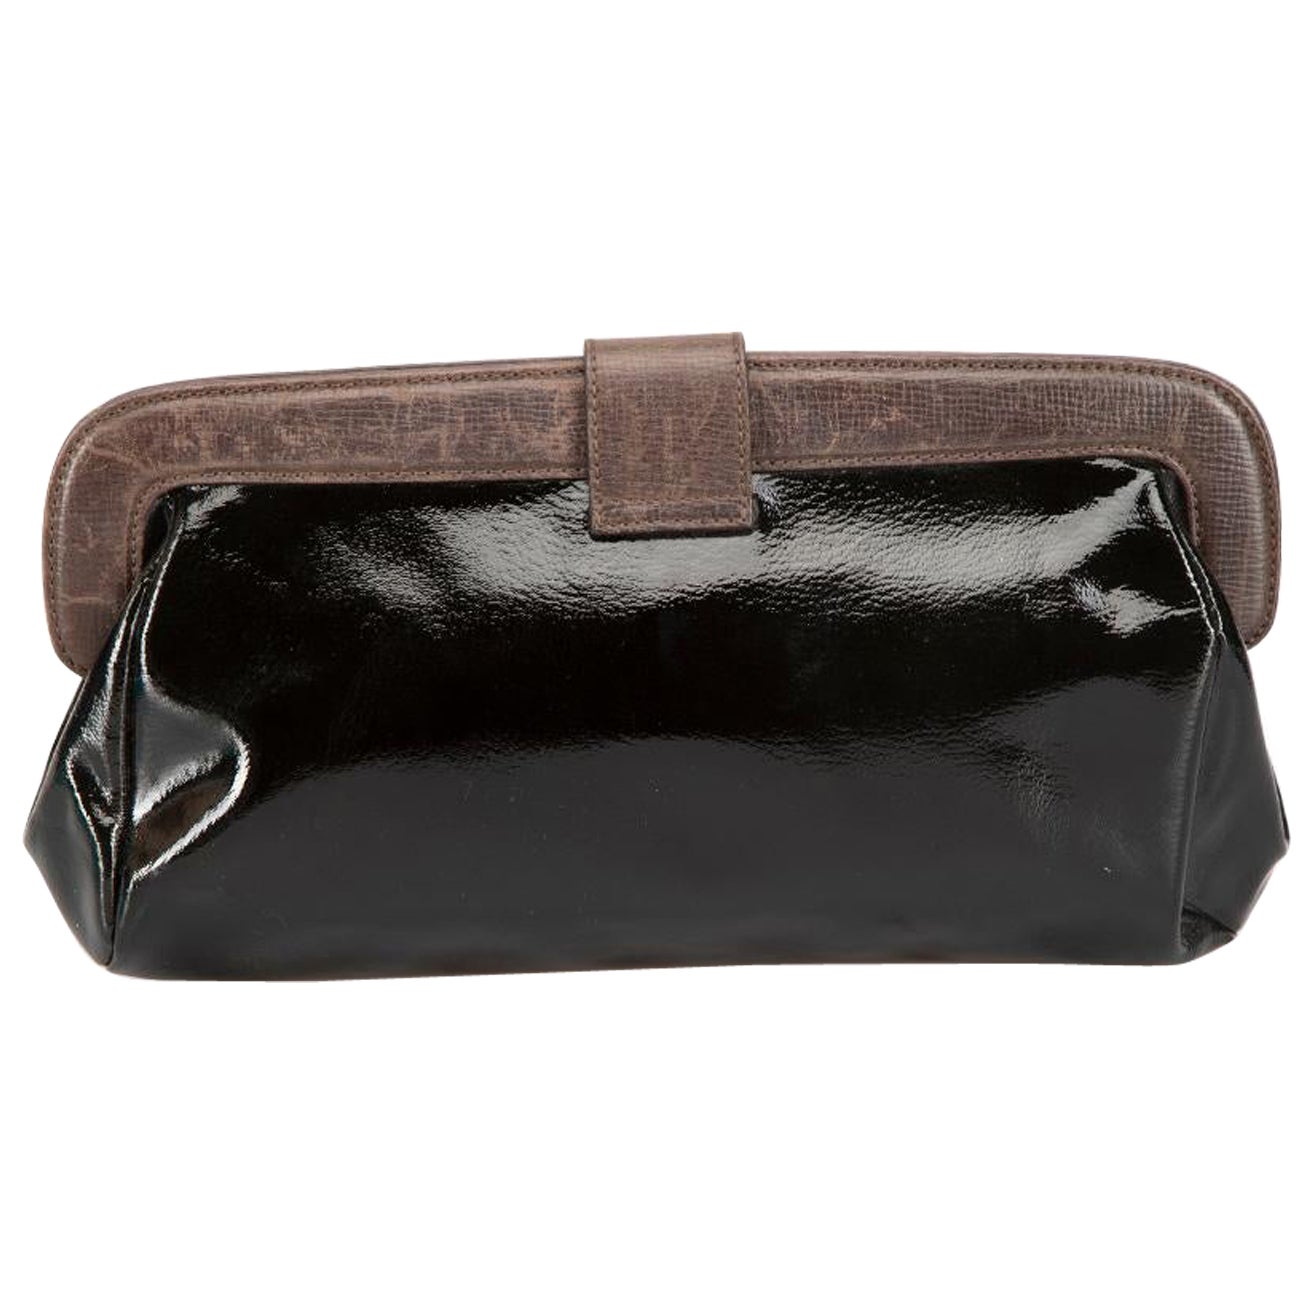 Marni Black Patent Leather Clutch For Sale